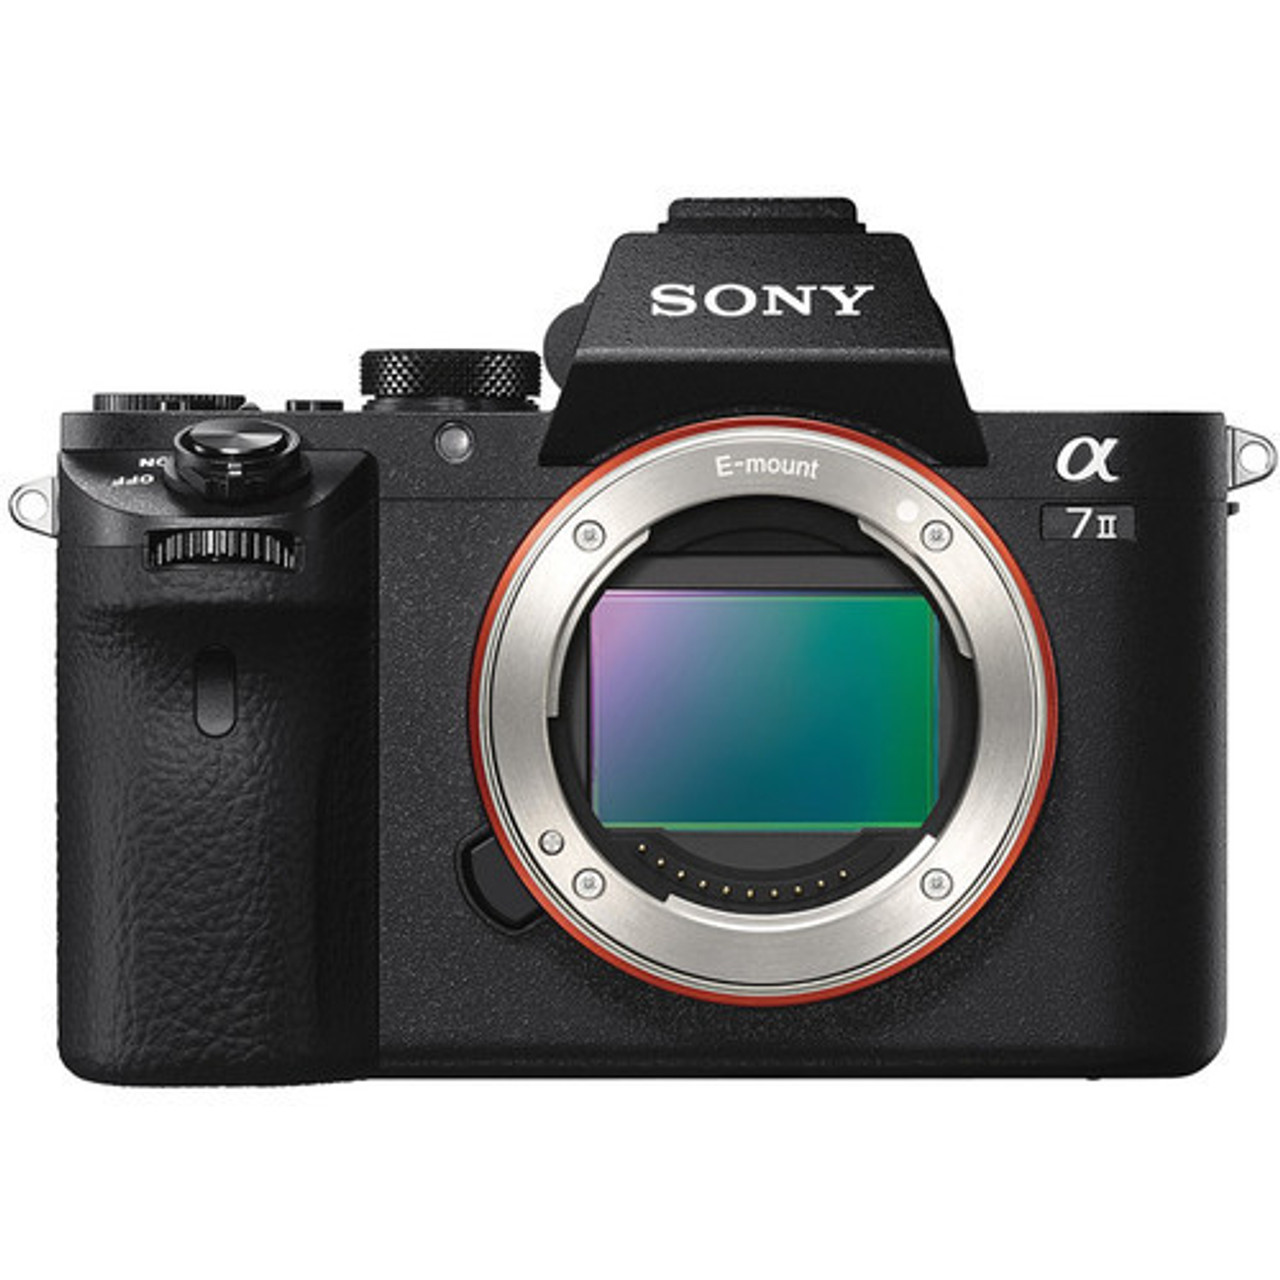 Sony A7 II review - 5 axis stabilisation in video mode 